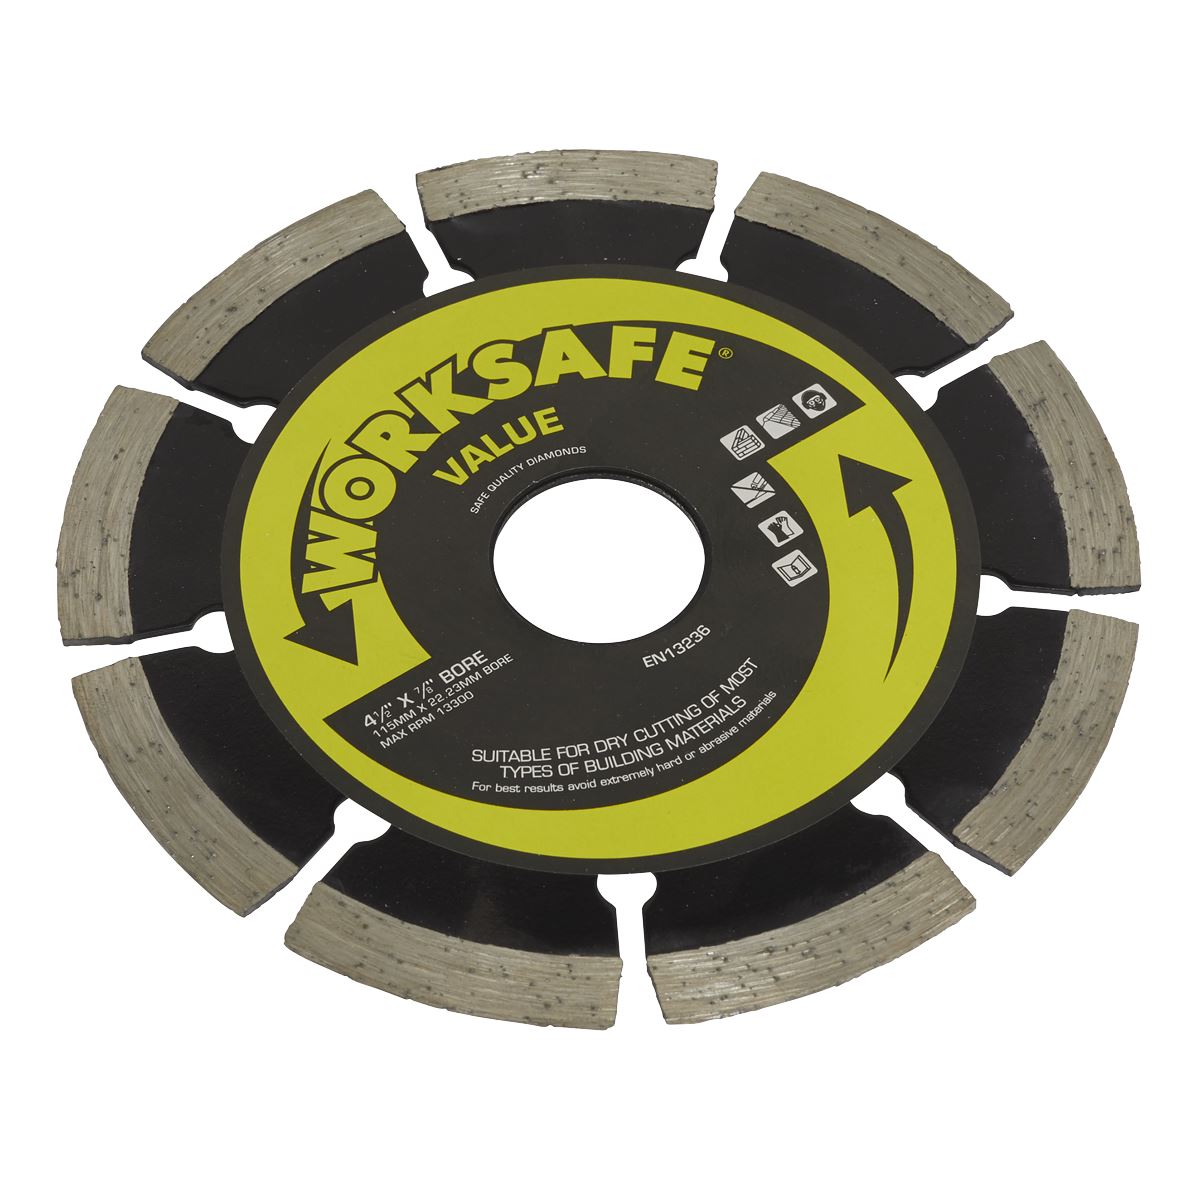 Worksafe by Sealey Value Diamond Cutting Blade 115mm x 22mm